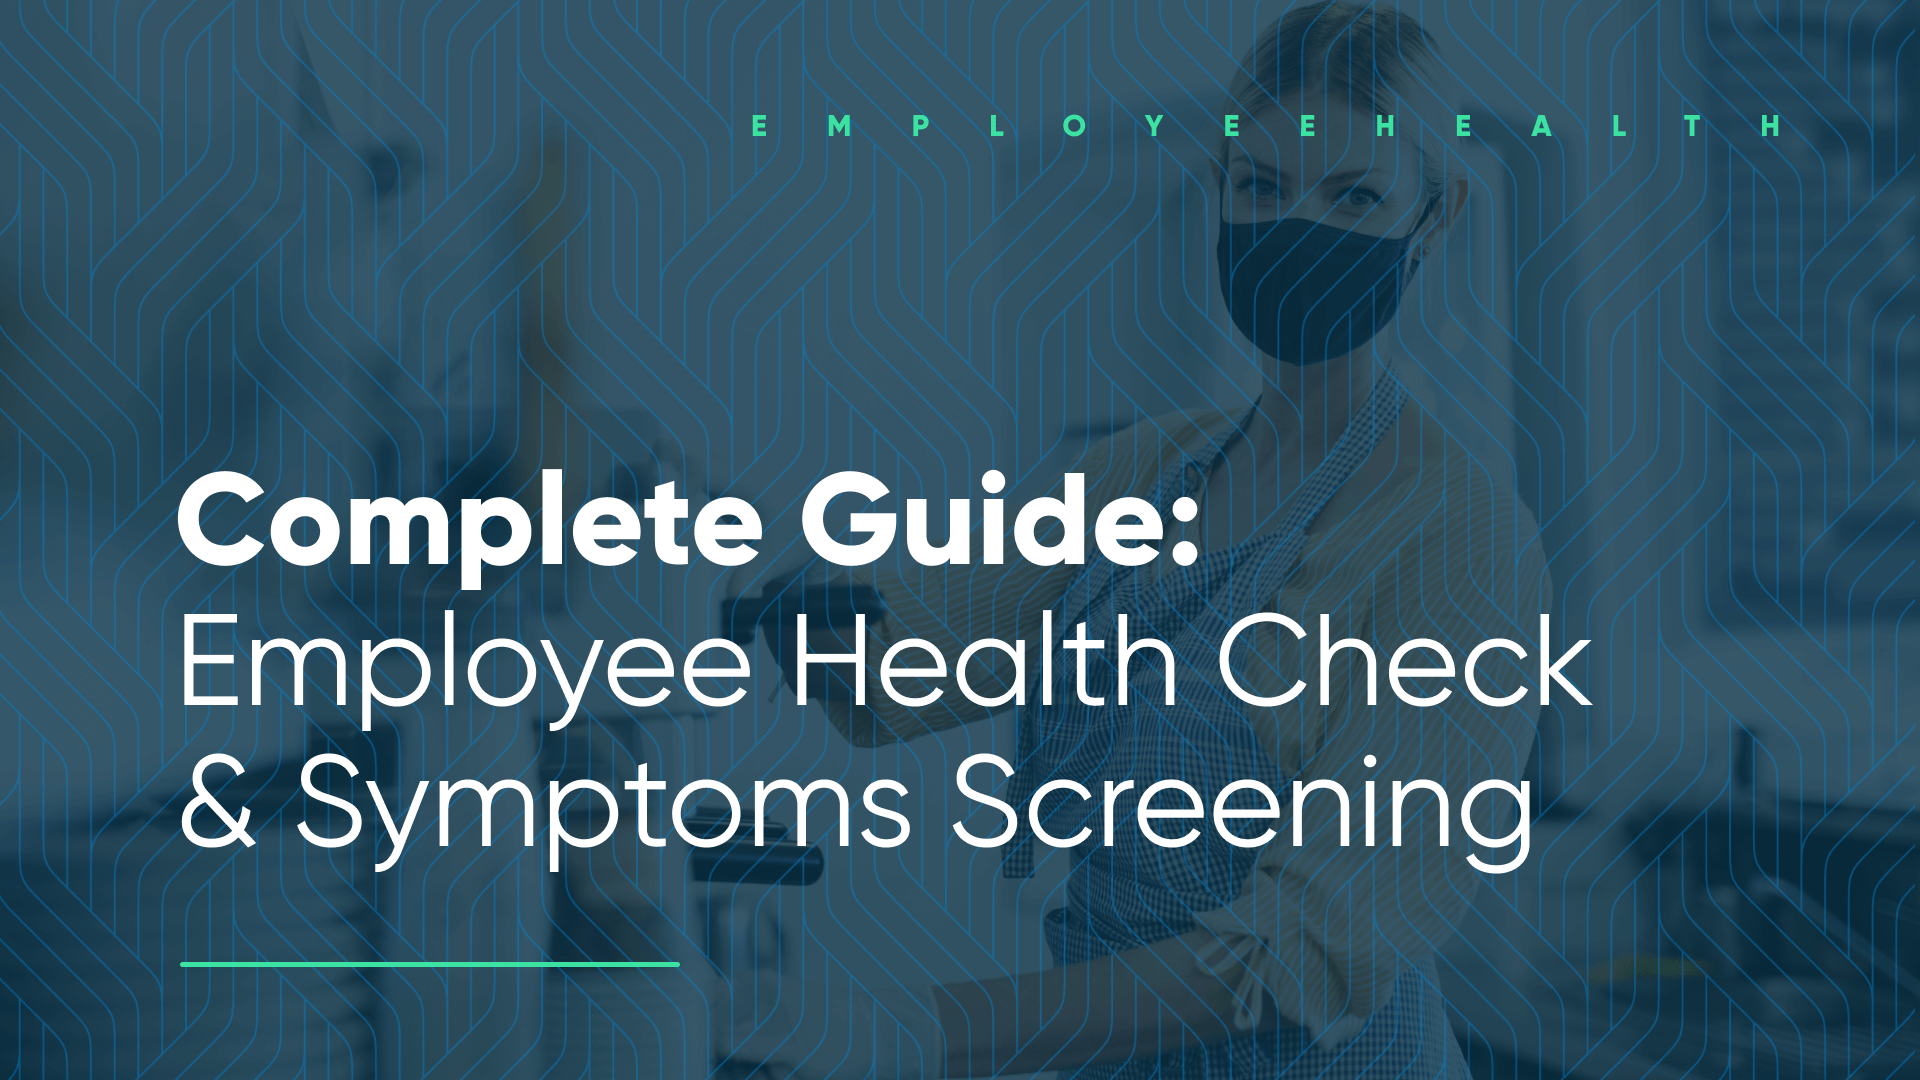 COVID-19 employee health check software